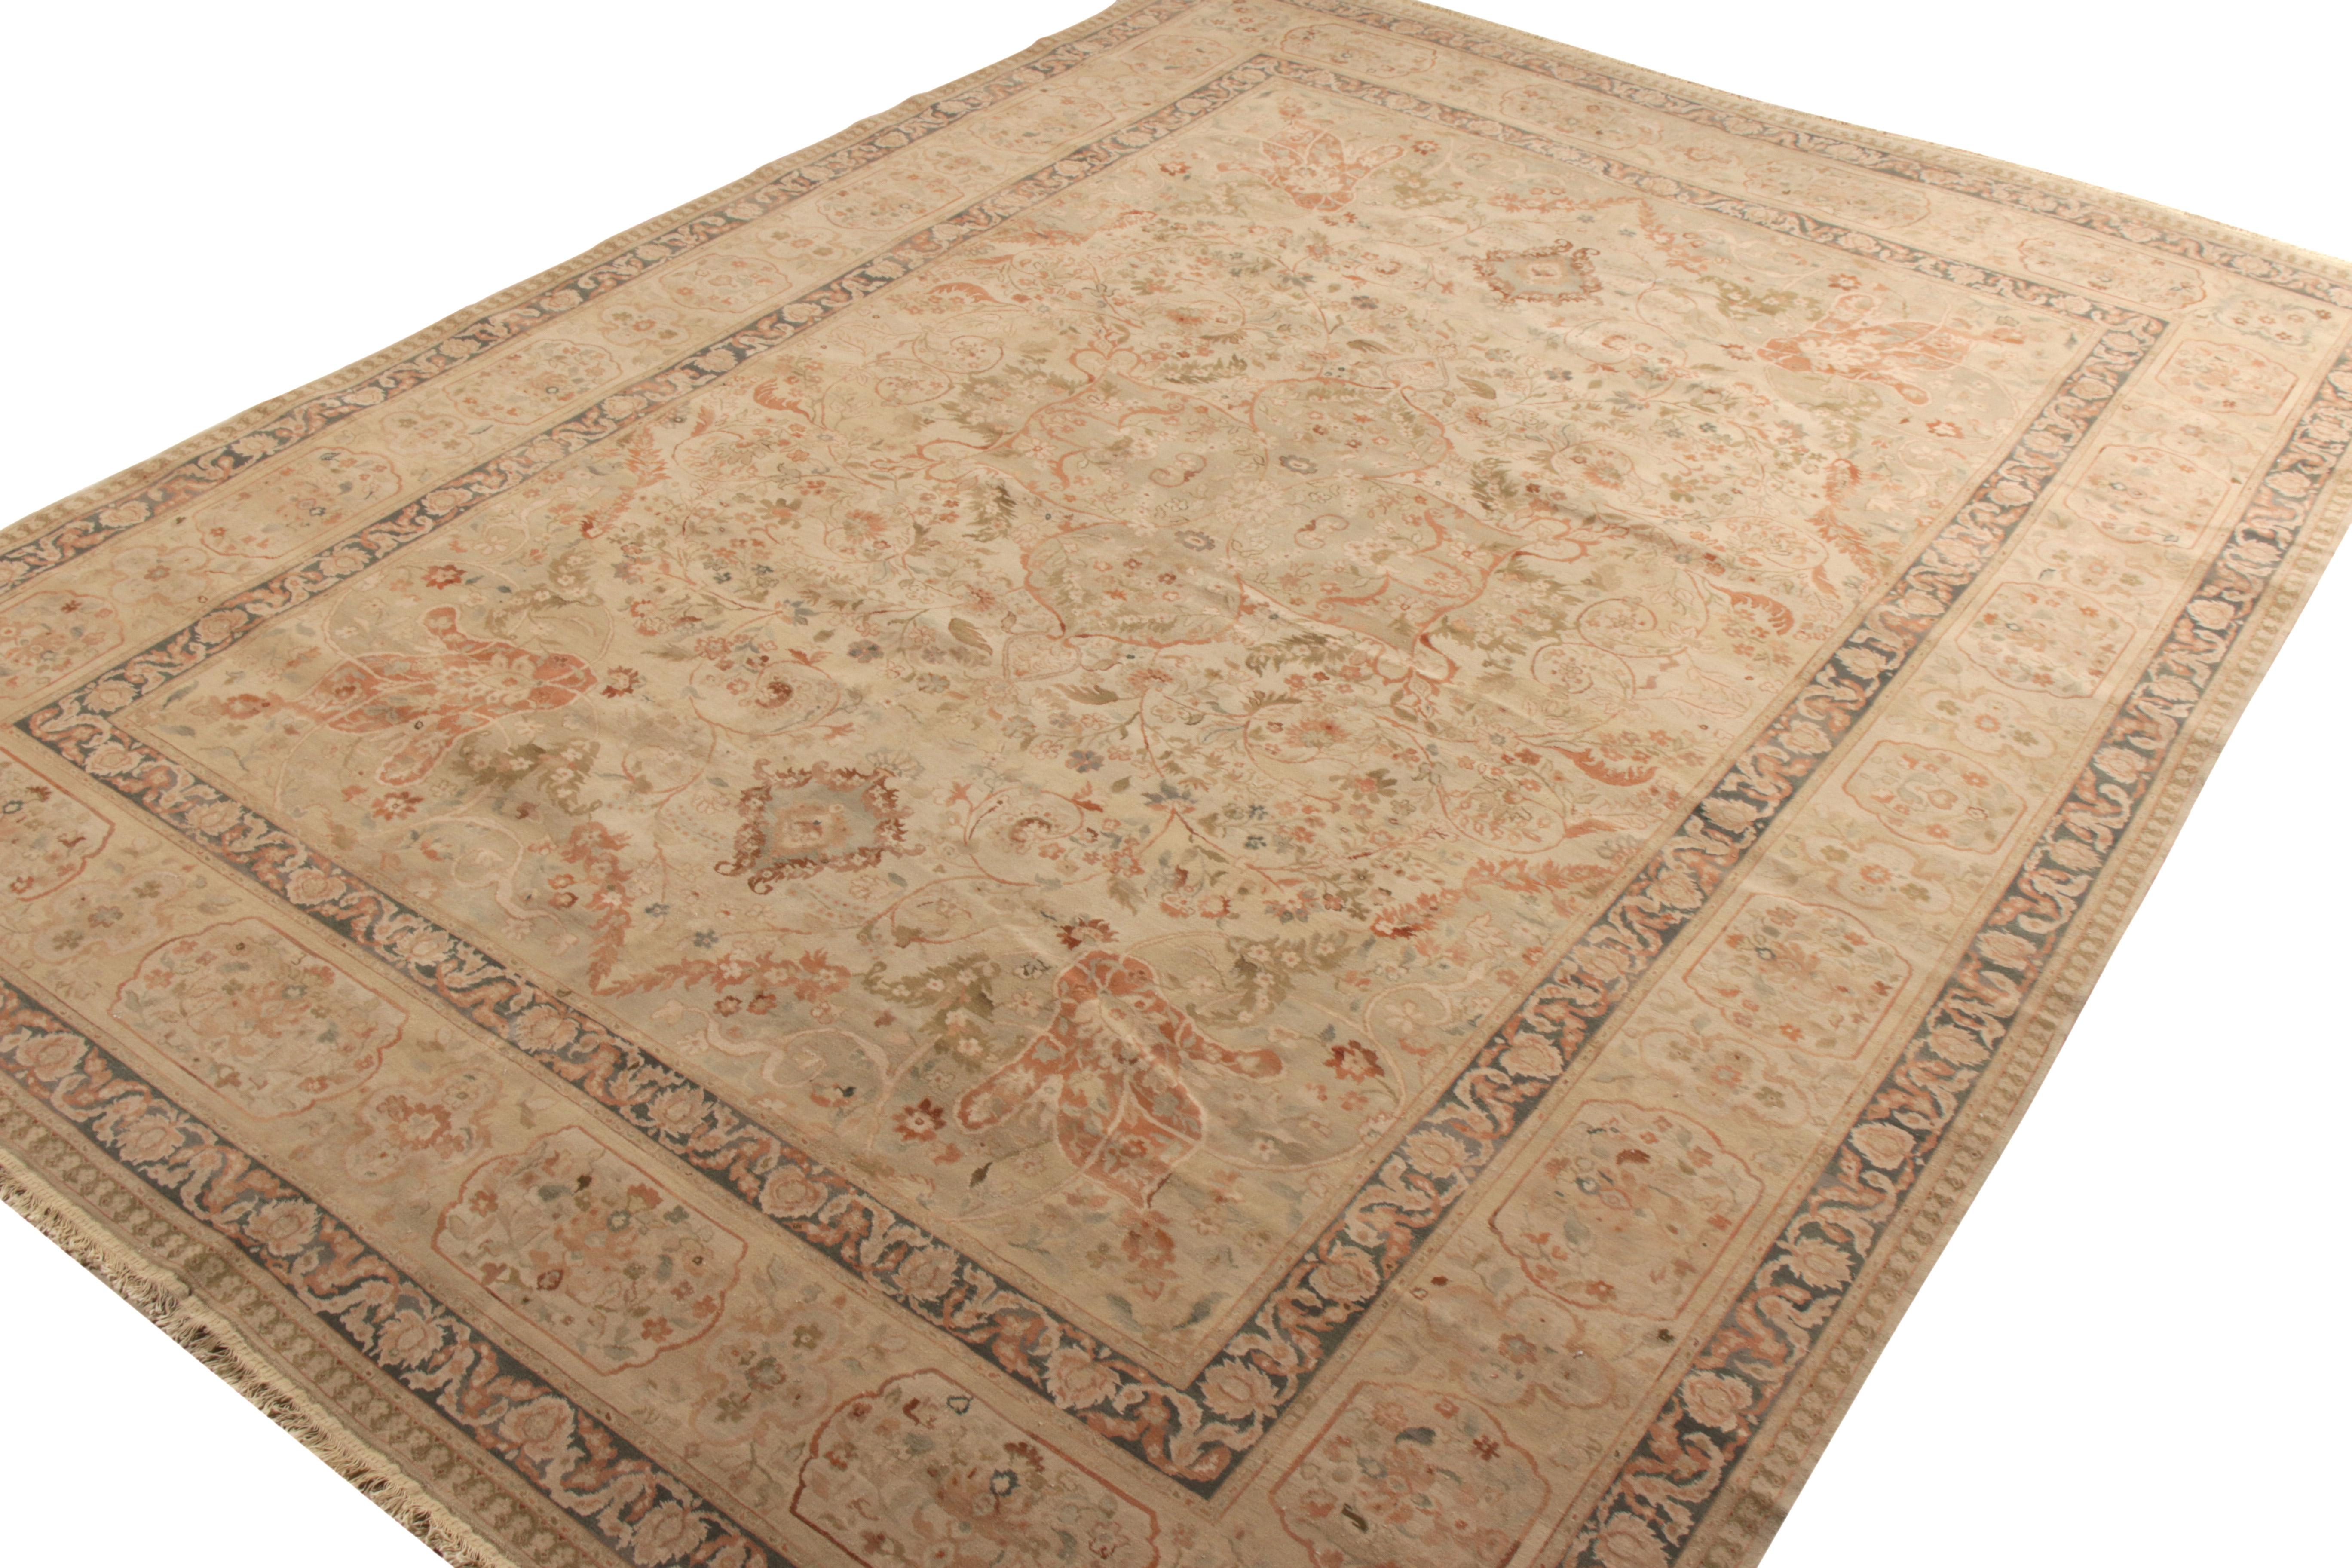 Chinese Rug & Kilim’s Persian Tabriz Style Rug in Beige-Brown, Pink Floral Pattern For Sale